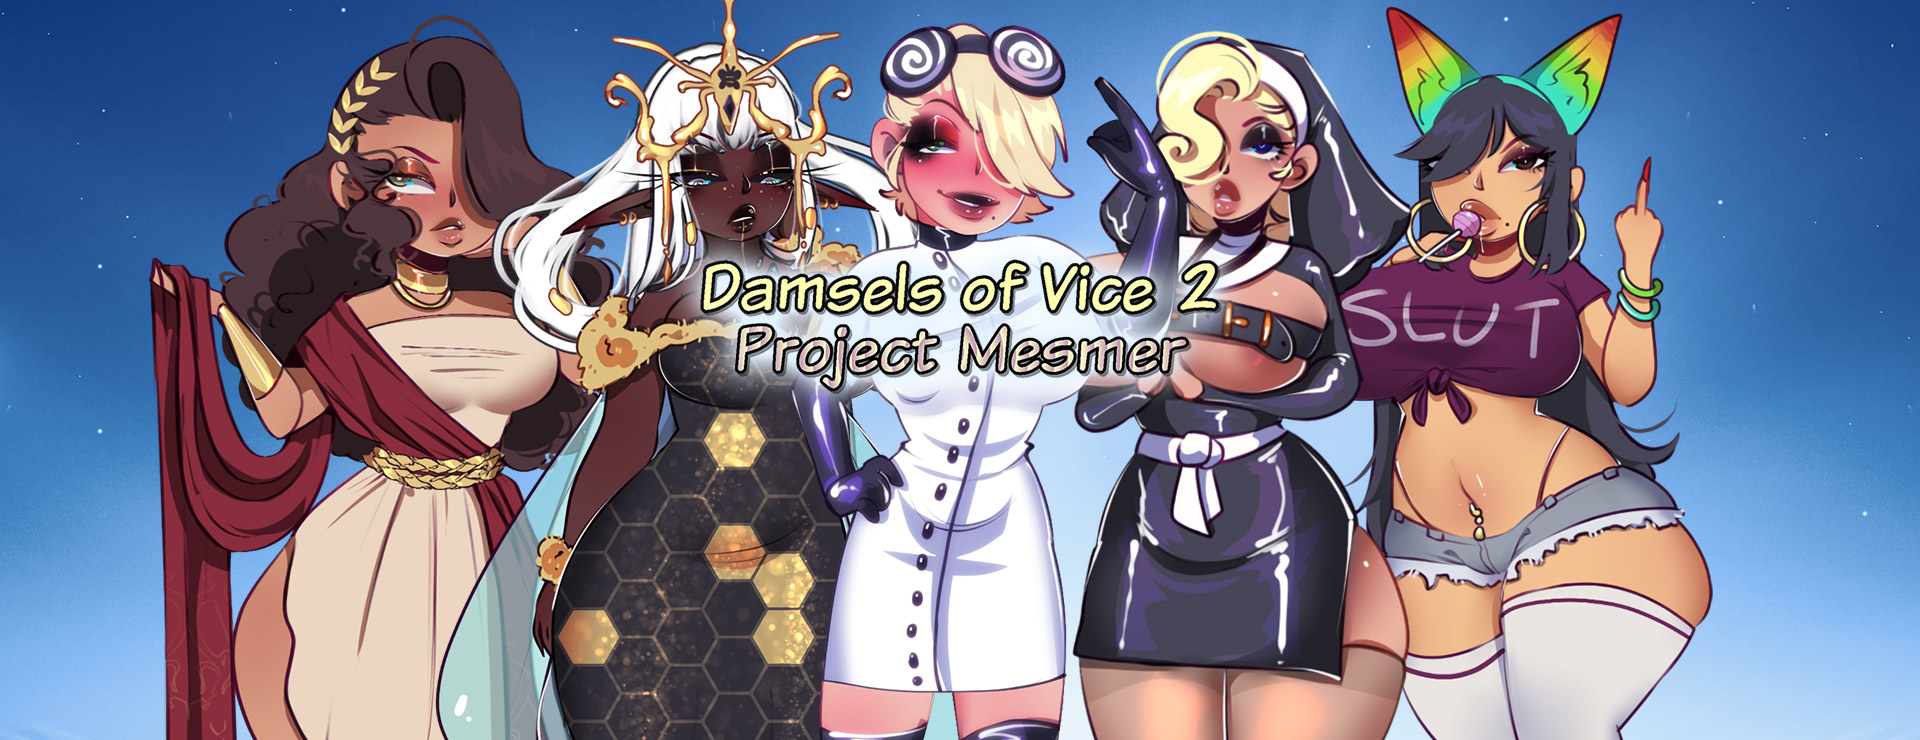 Damsels of Vice 2: Project Mesmer - RPG Gra